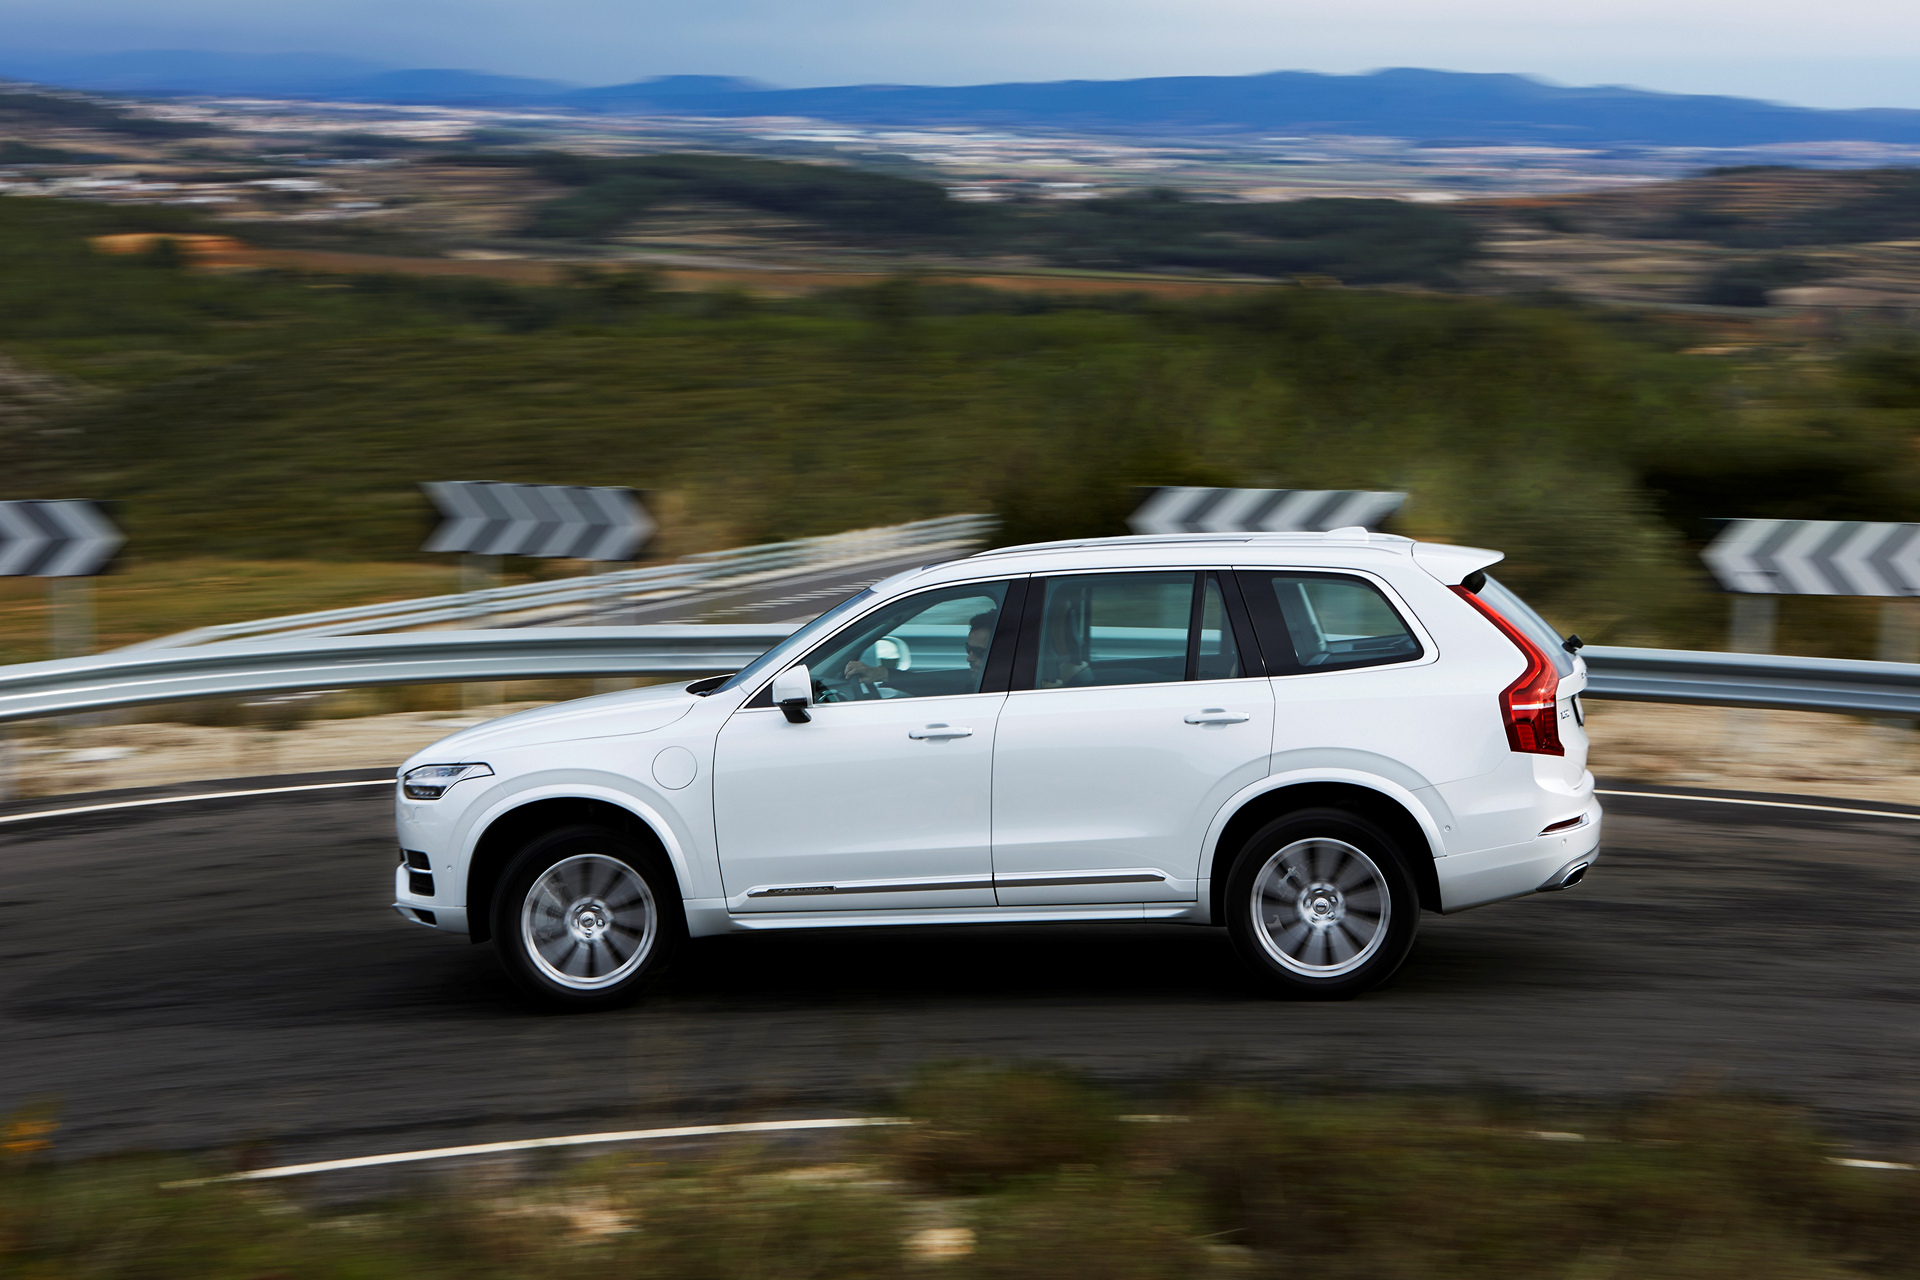 Volvo XC90 © Zhejiang Geely Holding Group Co., Ltd